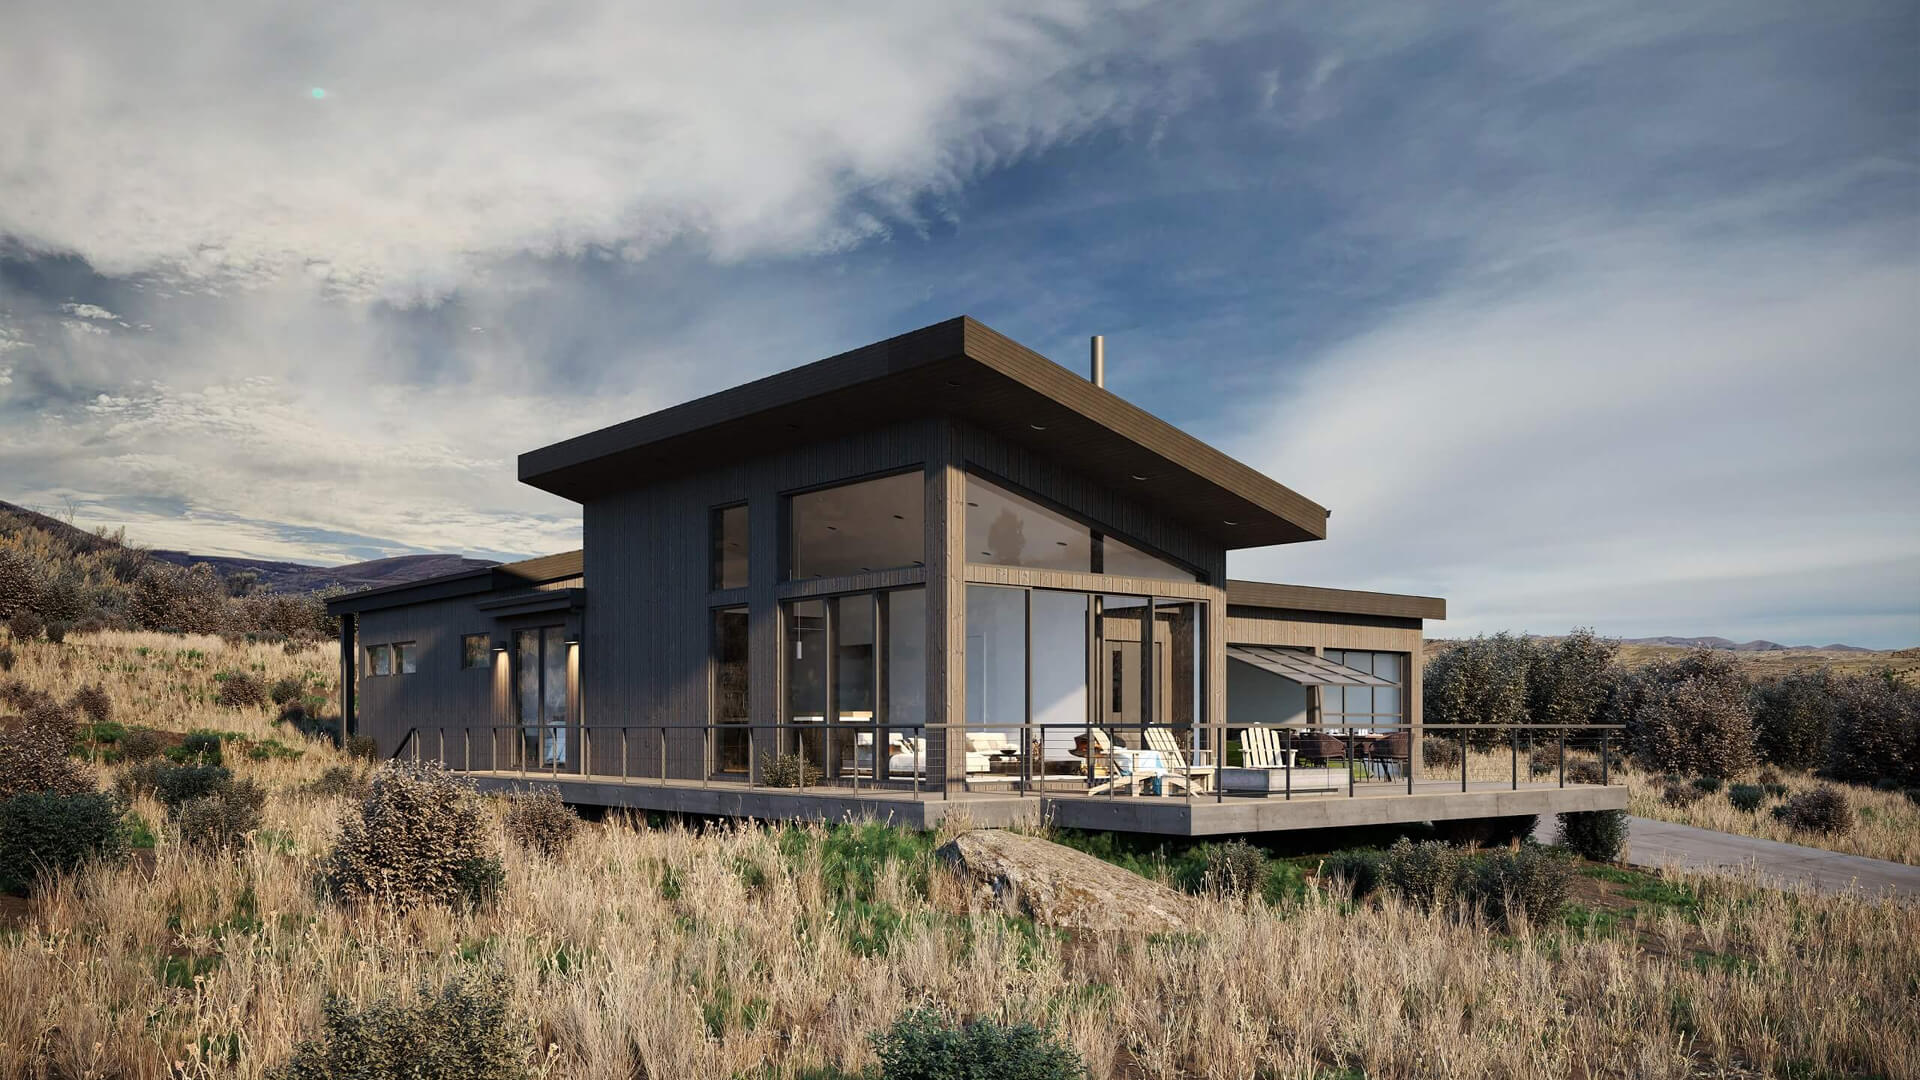 Single-Family House 3D Render in a Prairie Setting